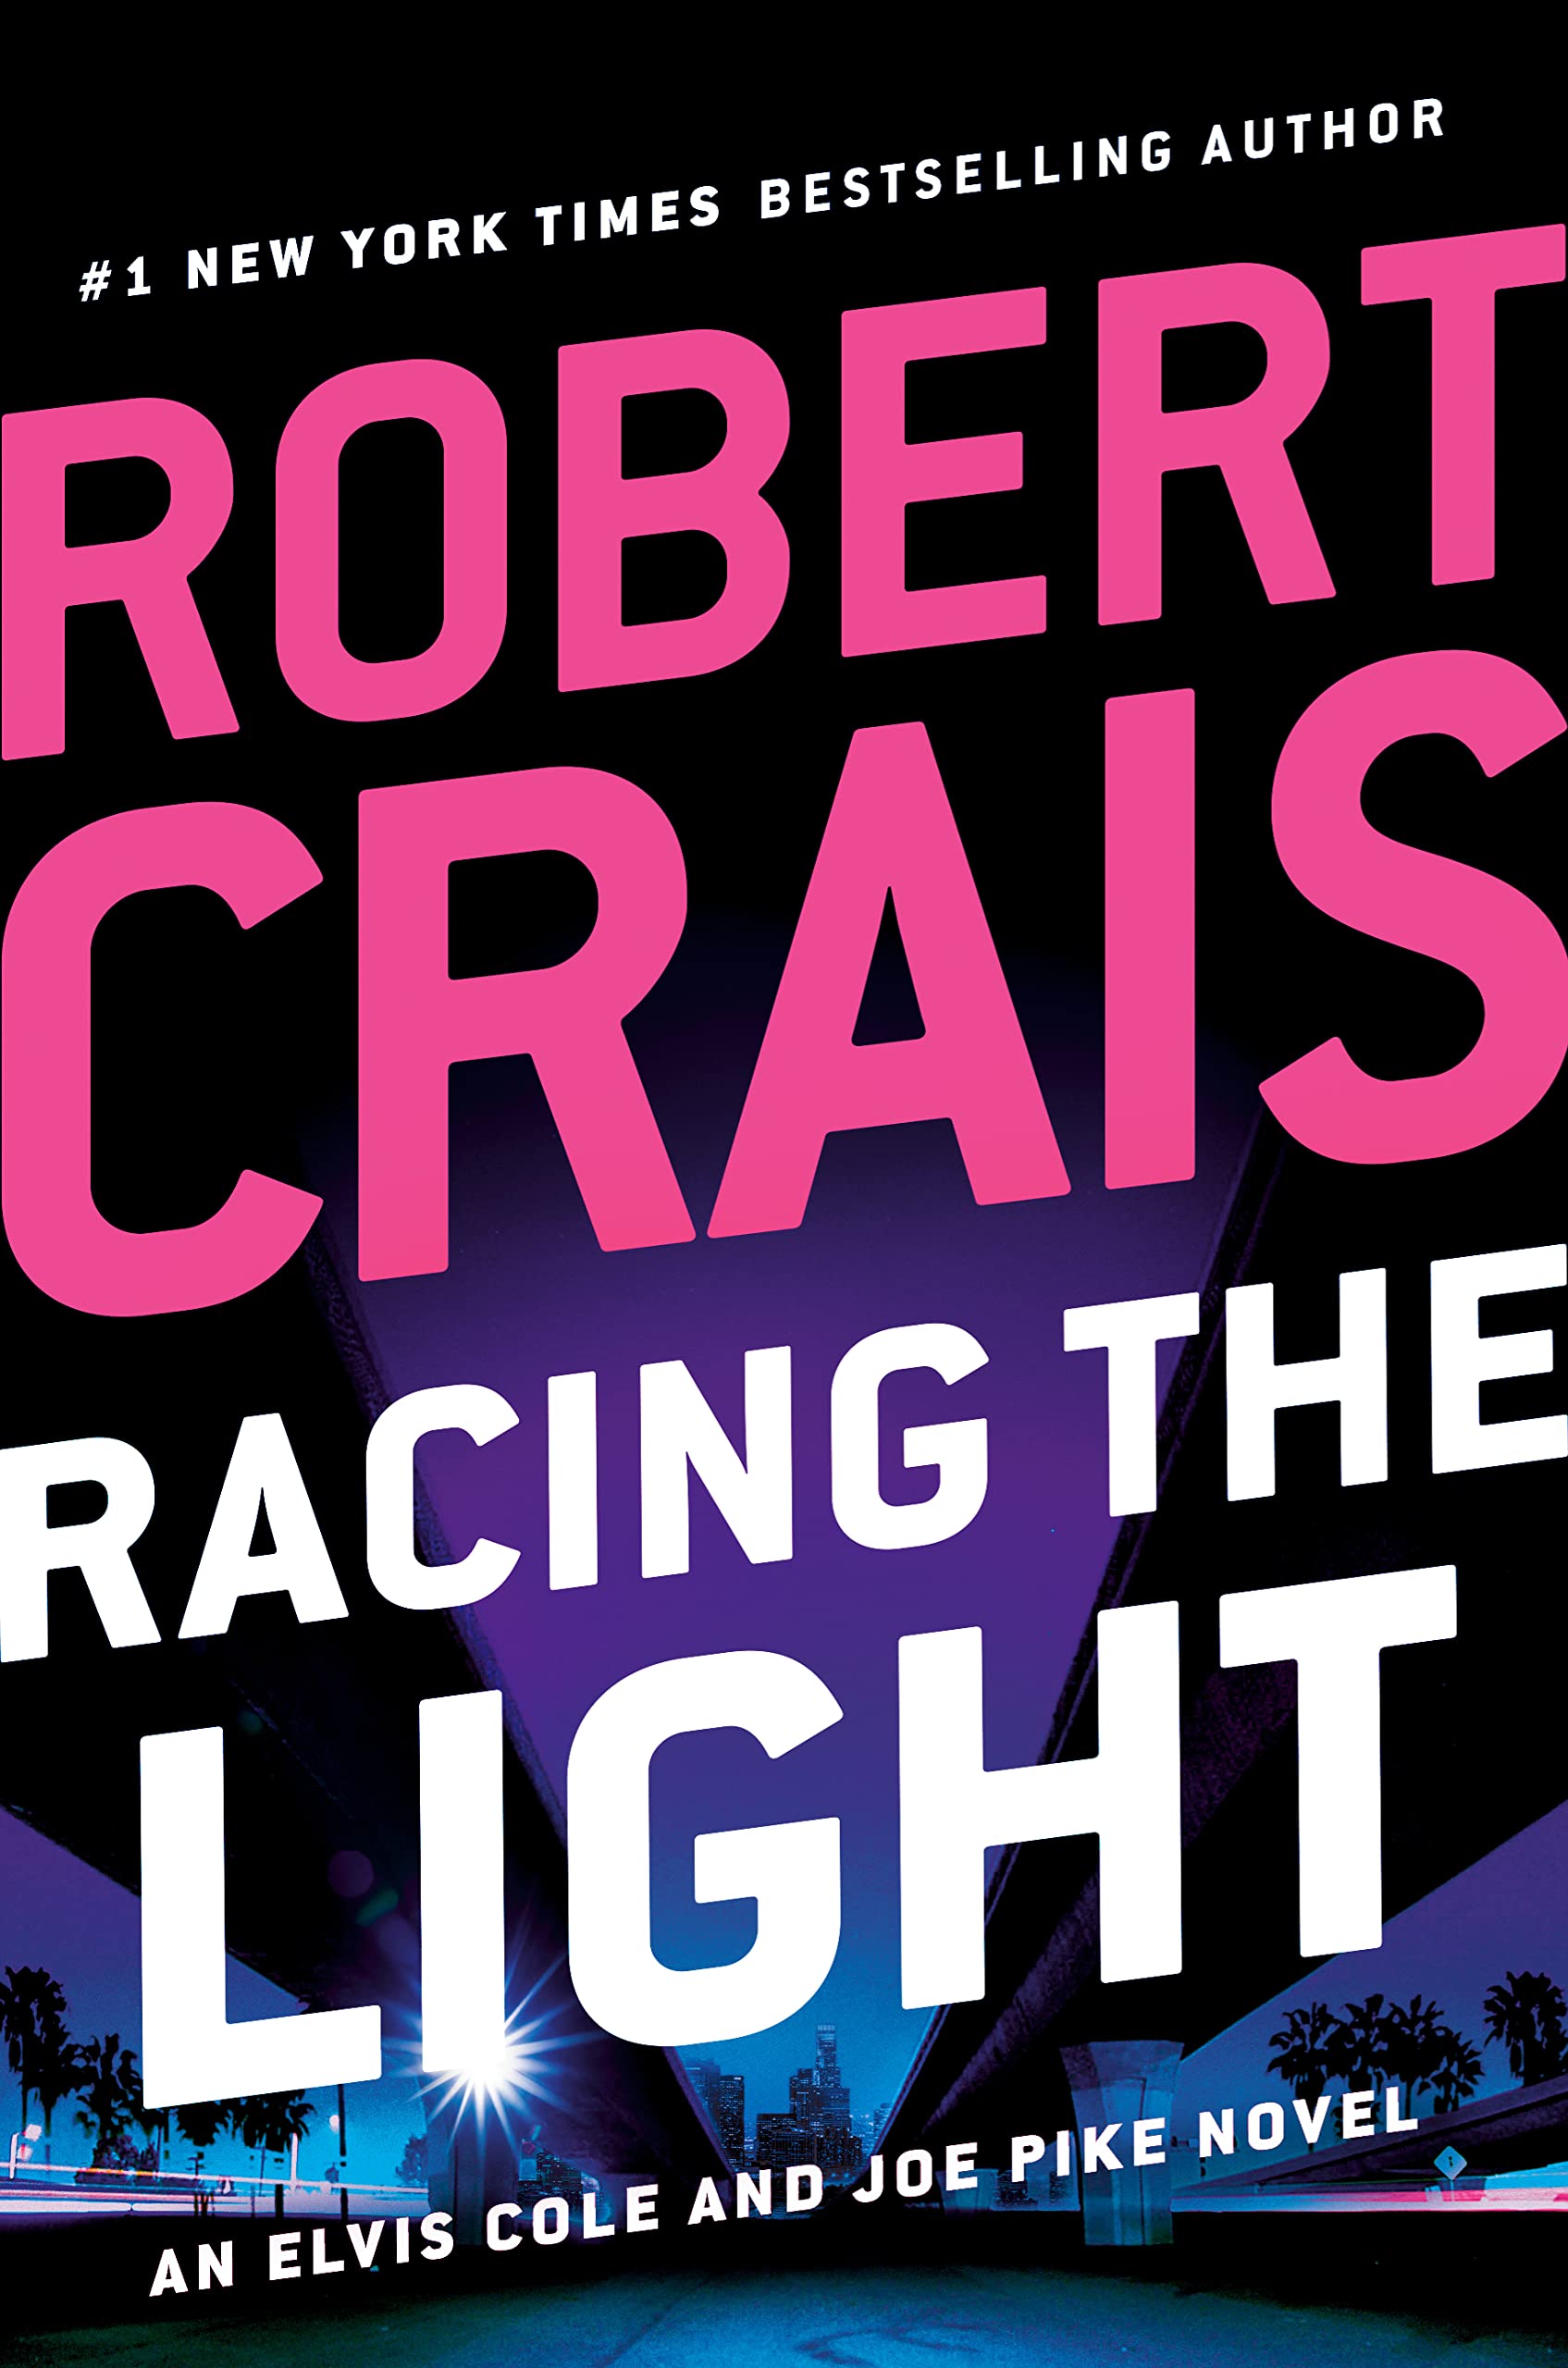 Image for "Racing the Light"